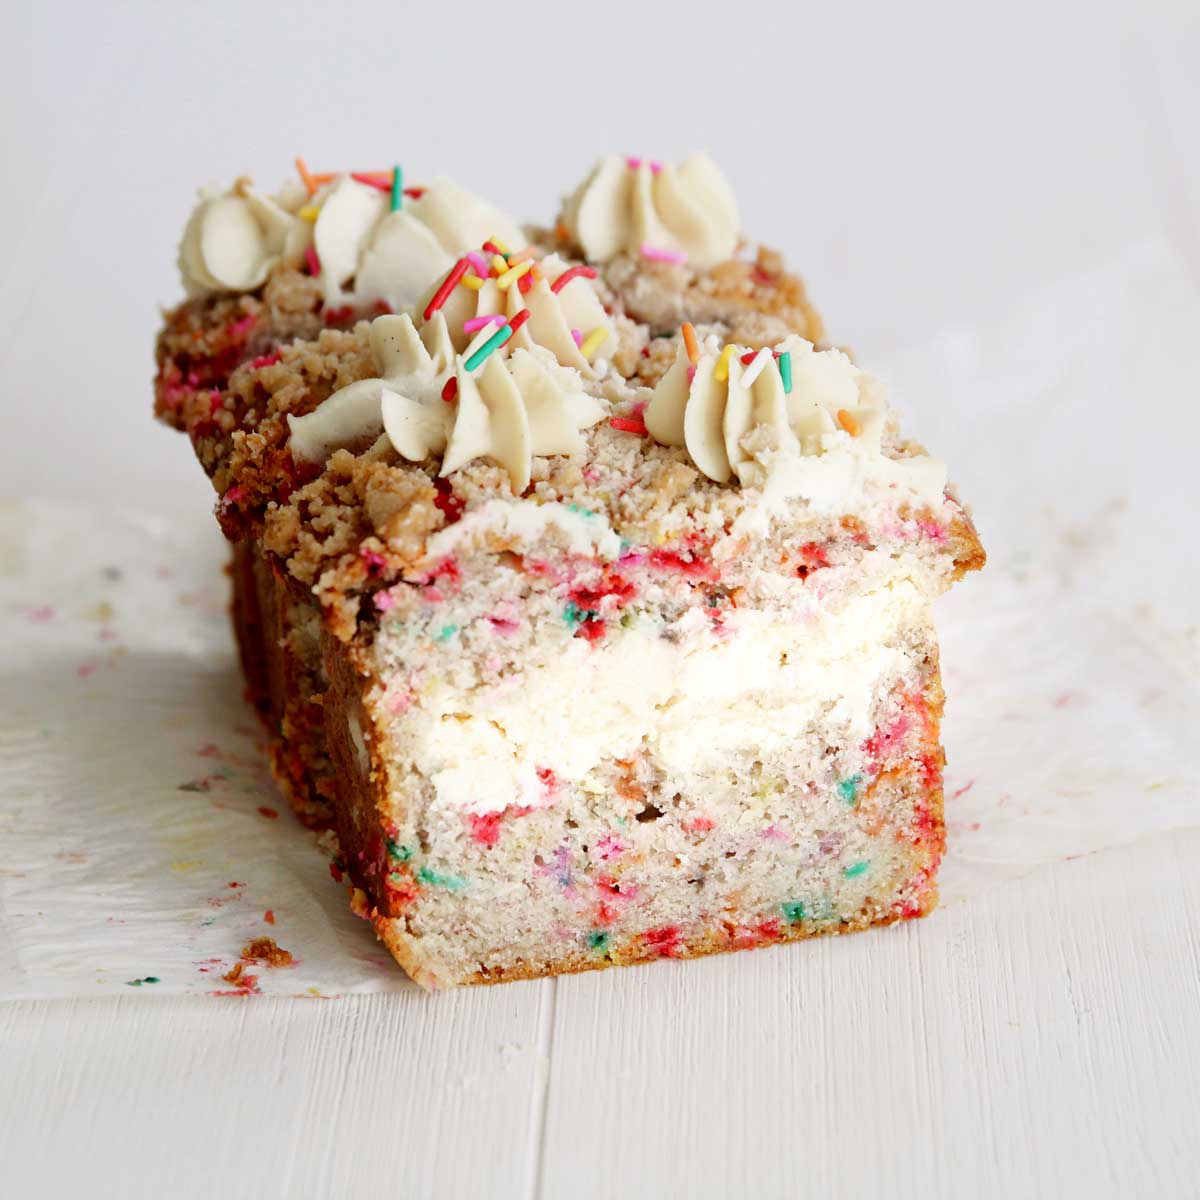 It's Your Birthday Cake Banana Bread with Cream Cheese Filling (No Eggs, No Butter) - Peppermint Whipped Cream